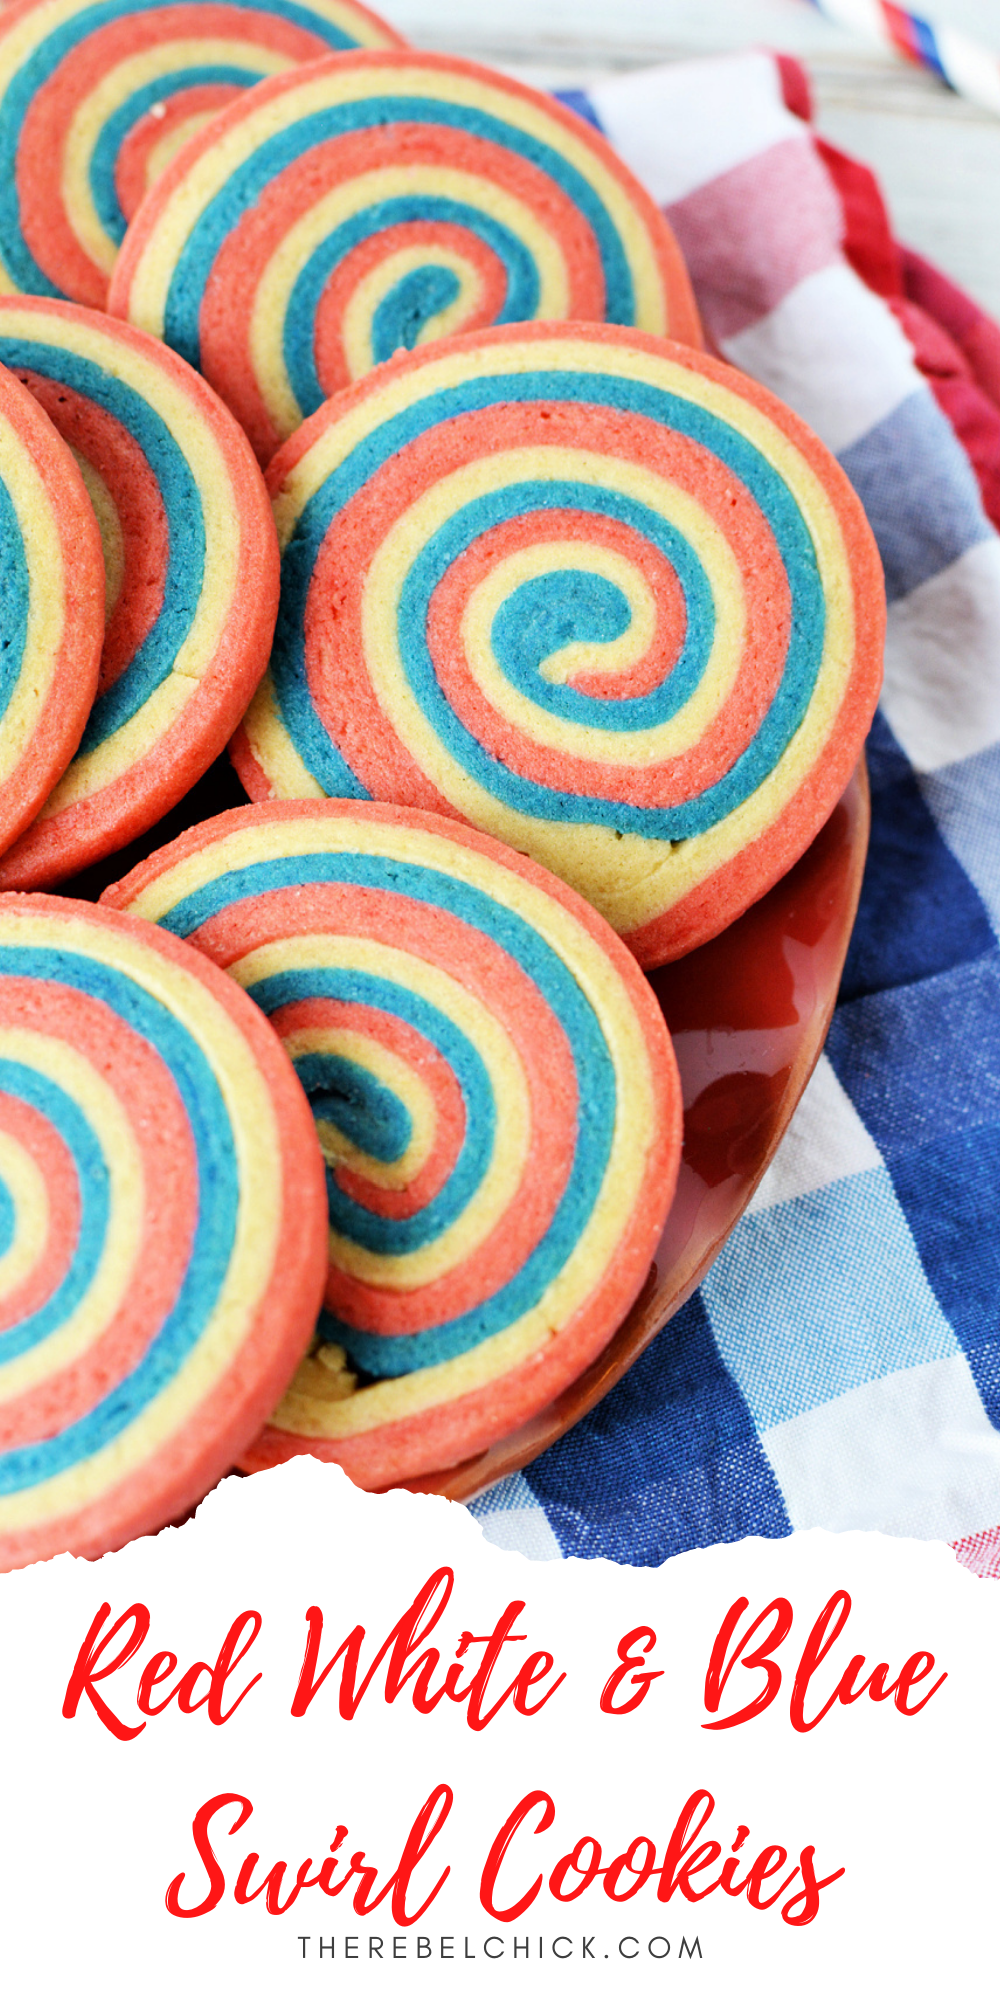 Red White and Blue Swirl Cookies